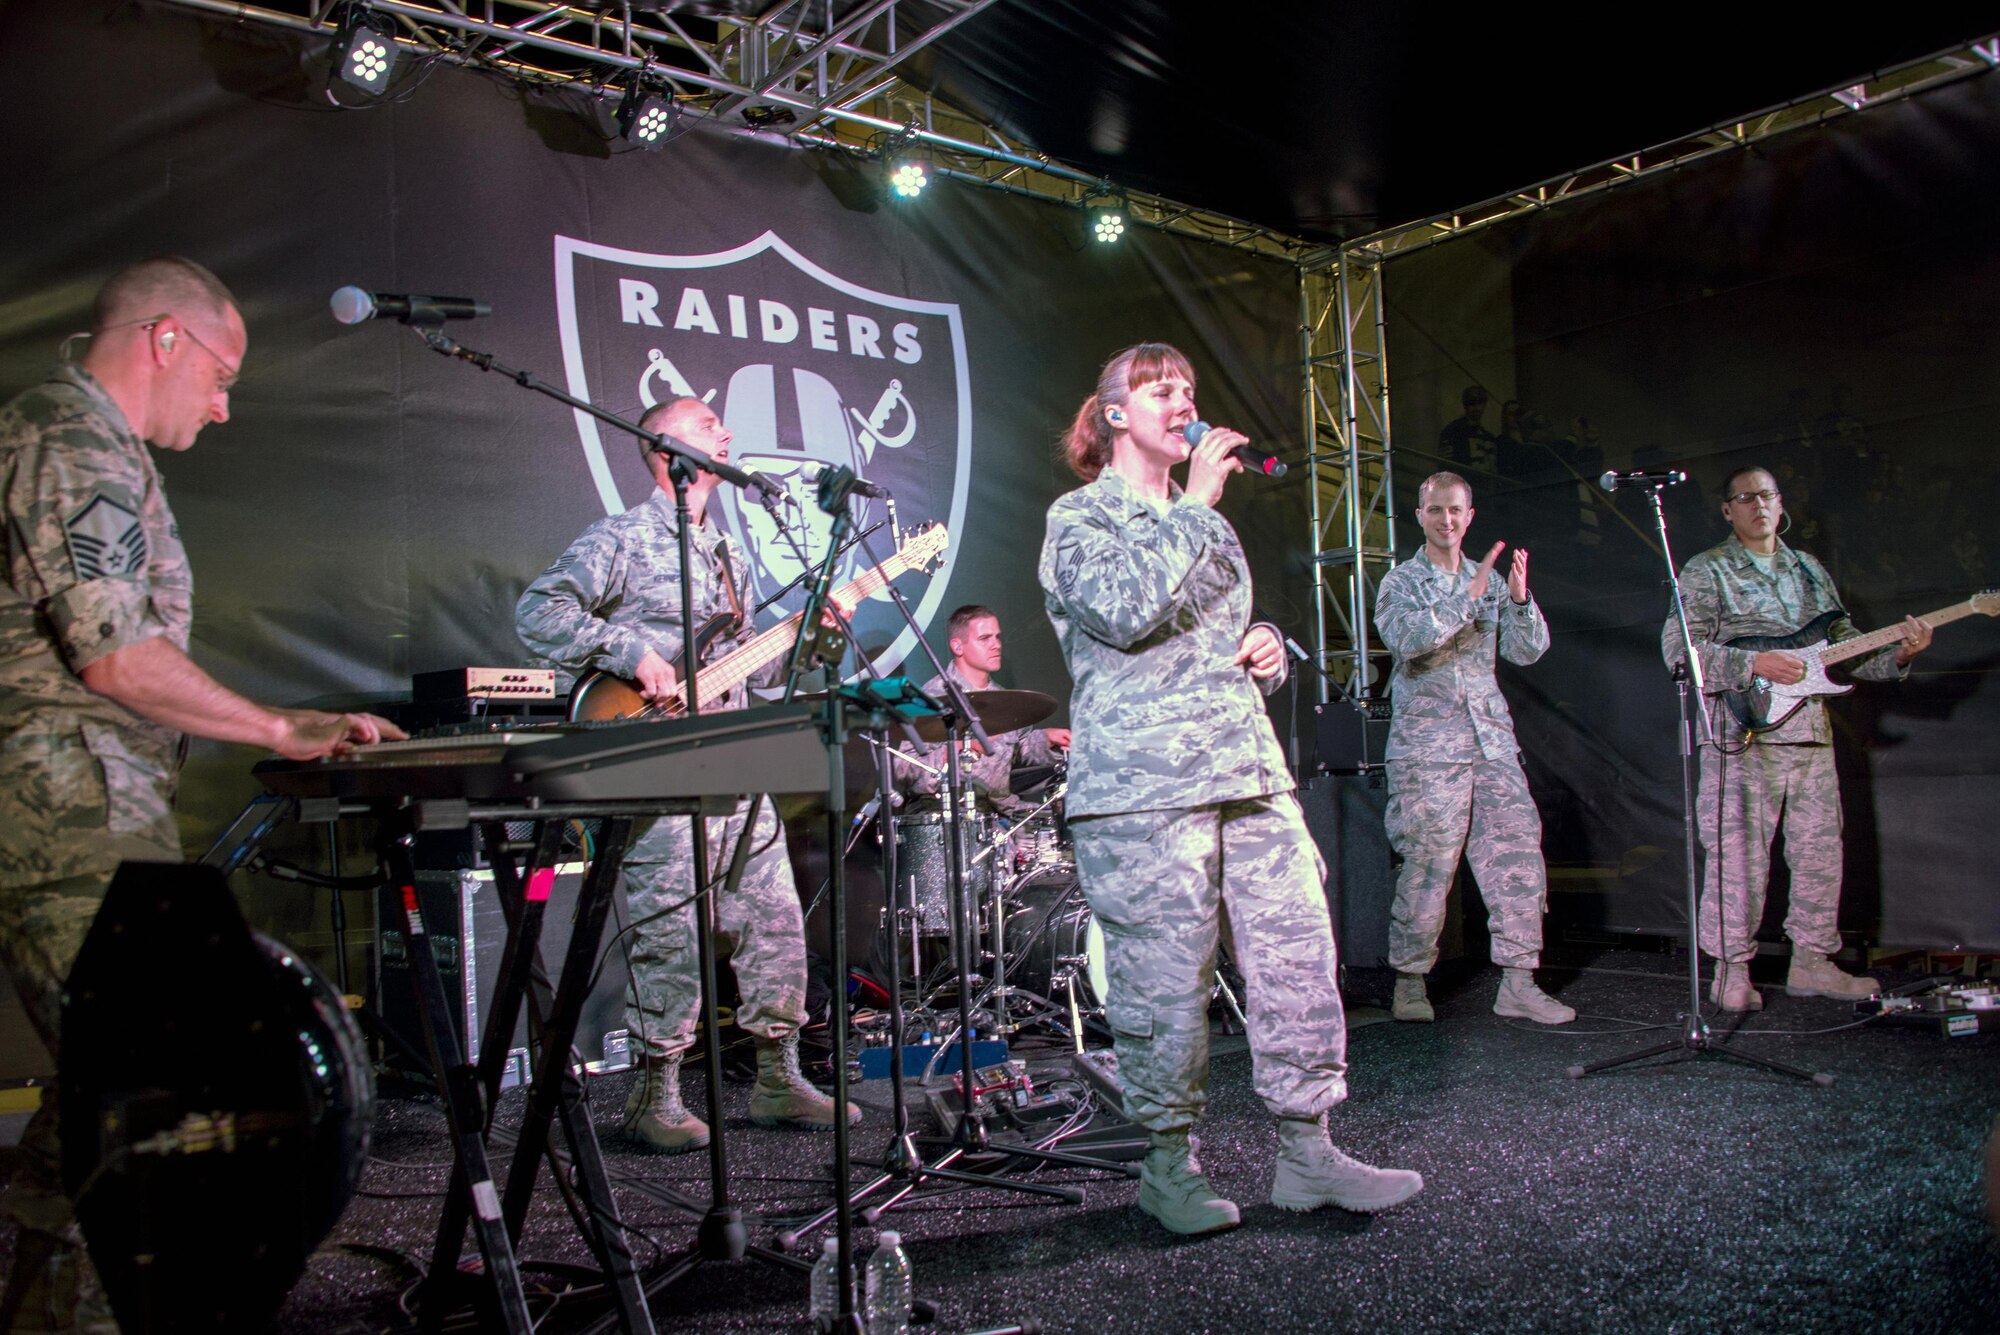 The Air Force Band of the Golden West rock group “Mobility” perform during the halftime show of the Oakland Raiders Salute to Service game against the Denver Broncos at the Oakland Coliseum in Oakland Calif., Nov. 6, 2016. The band is stationed at Travis Air Force Base, Calif., and performed to a live audience of more than 54,000 fans. The band’s performing groups advance Air Mobility Command and global Air Force missions by providing professional musical products and services for official military, recruiting and community relations events. (U.S. Air Force photo by Louis Briscese)